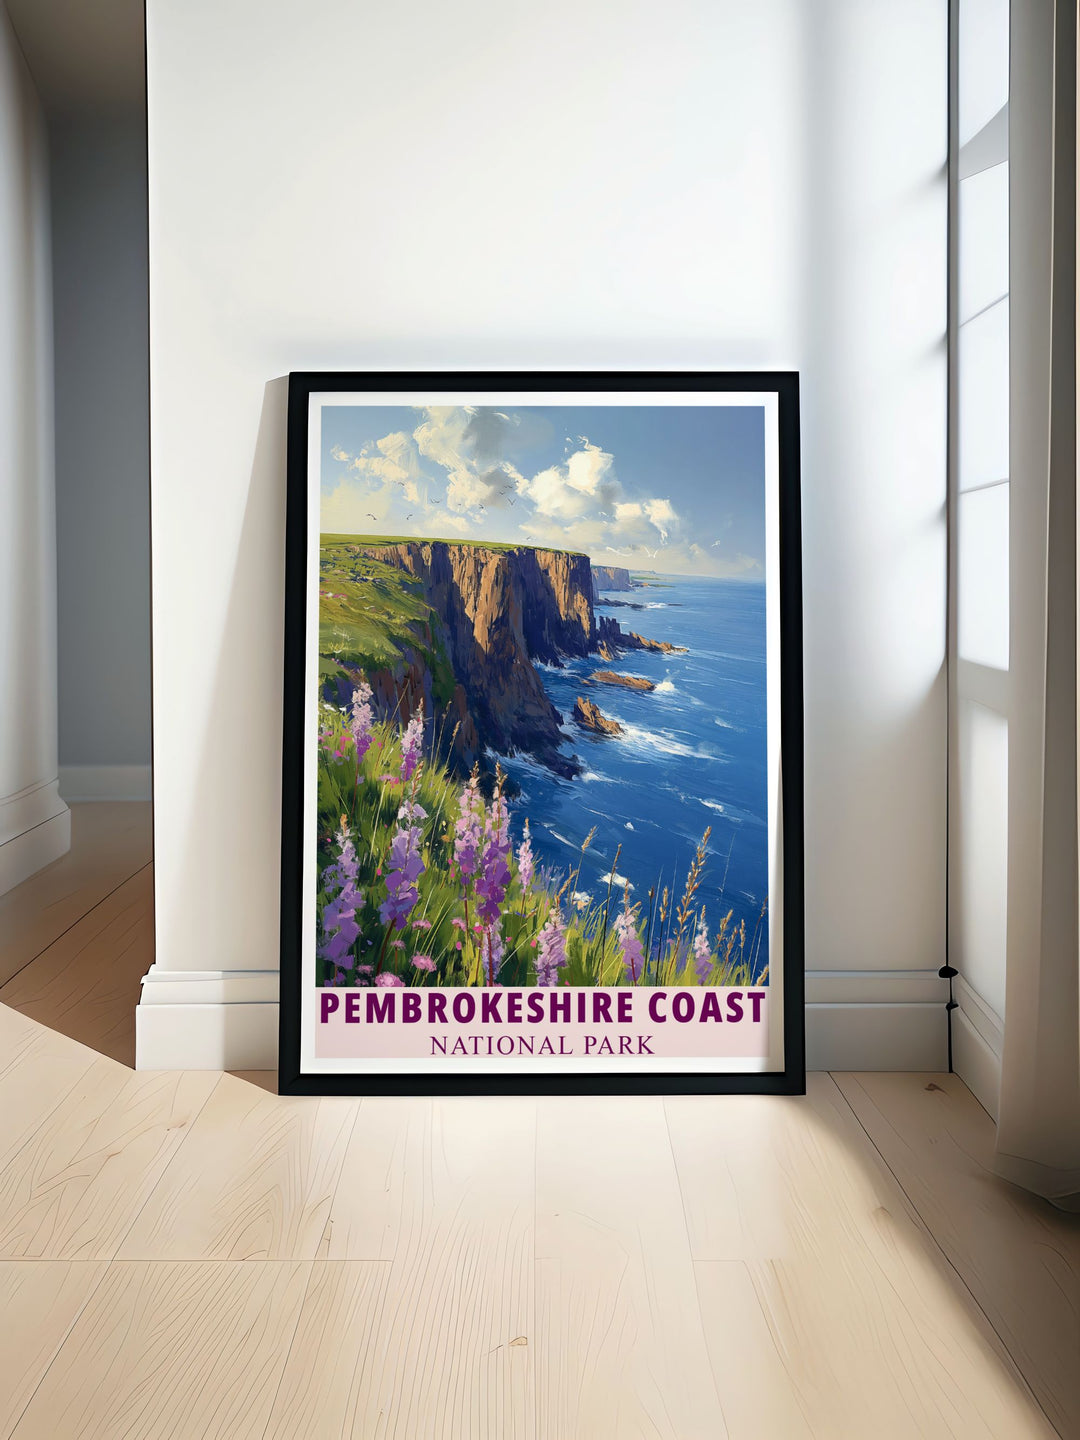 Pembrokeshire Coast National Park Travel Posters combine vintage travel art with modern design, celebrating the parks unique landscapes. These posters are perfect for adding a touch of nostalgia and elegance to any room, capturing the timeless charm of Wales.